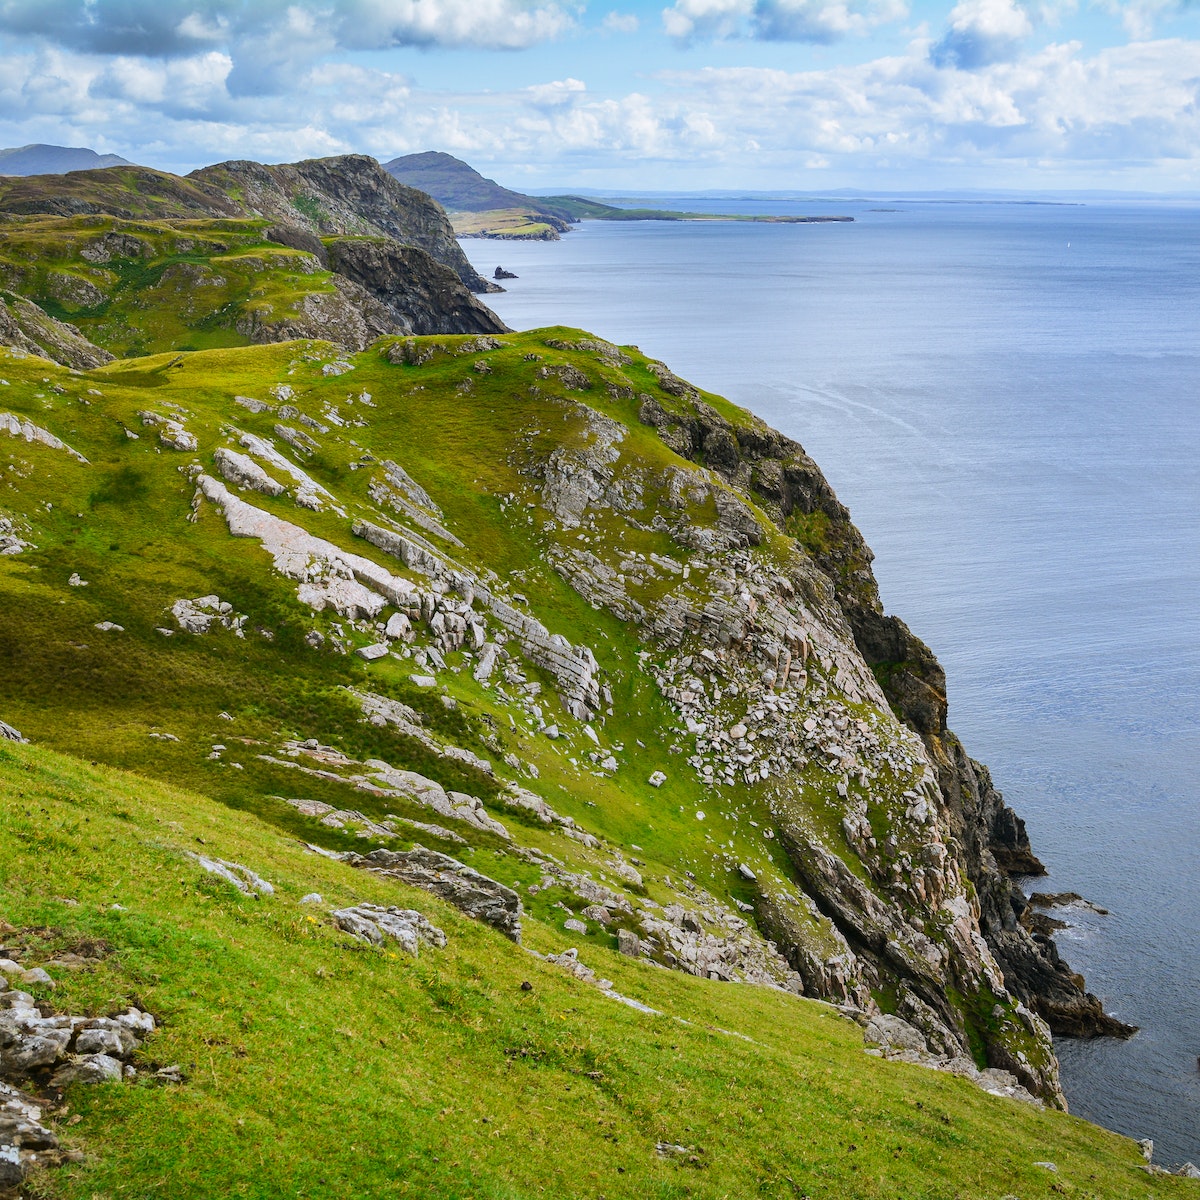 Coastal cliffs near the Slieve League in County Donegal.